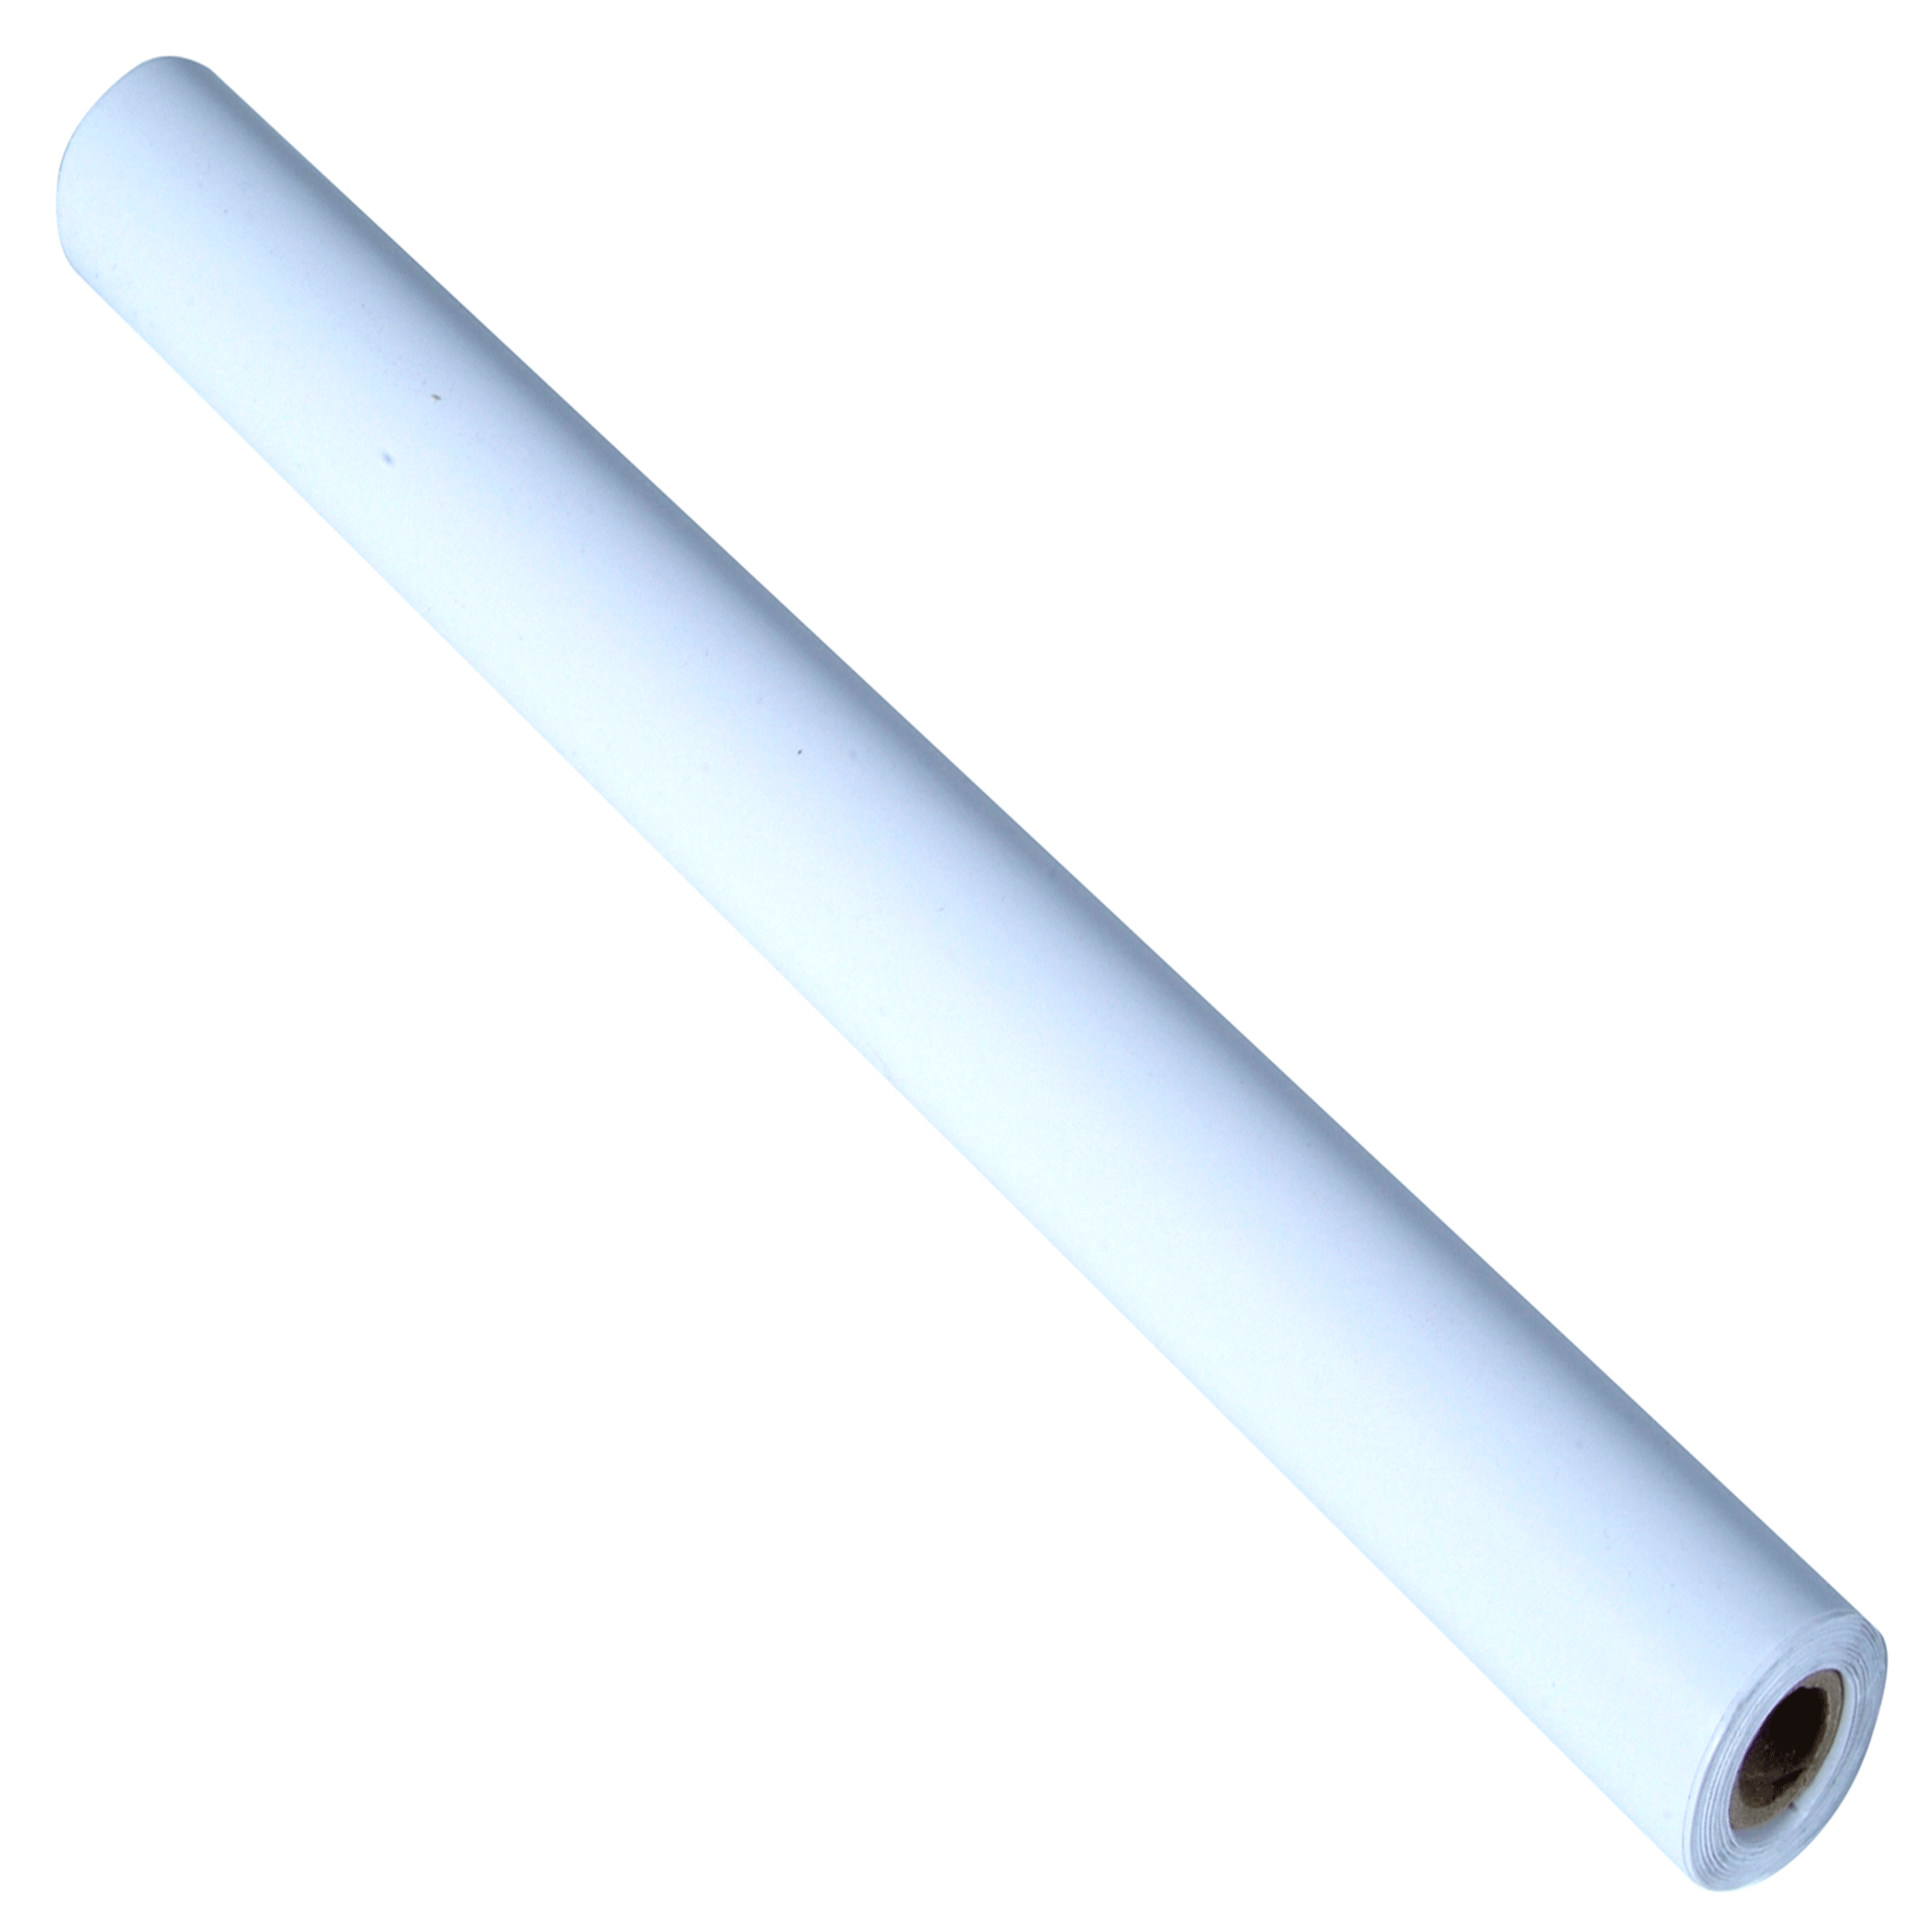 12" X 60" Shadow Board White Vinyl Self-adhesive Tape Roll To Silhouette And Manage Tools And Equipment